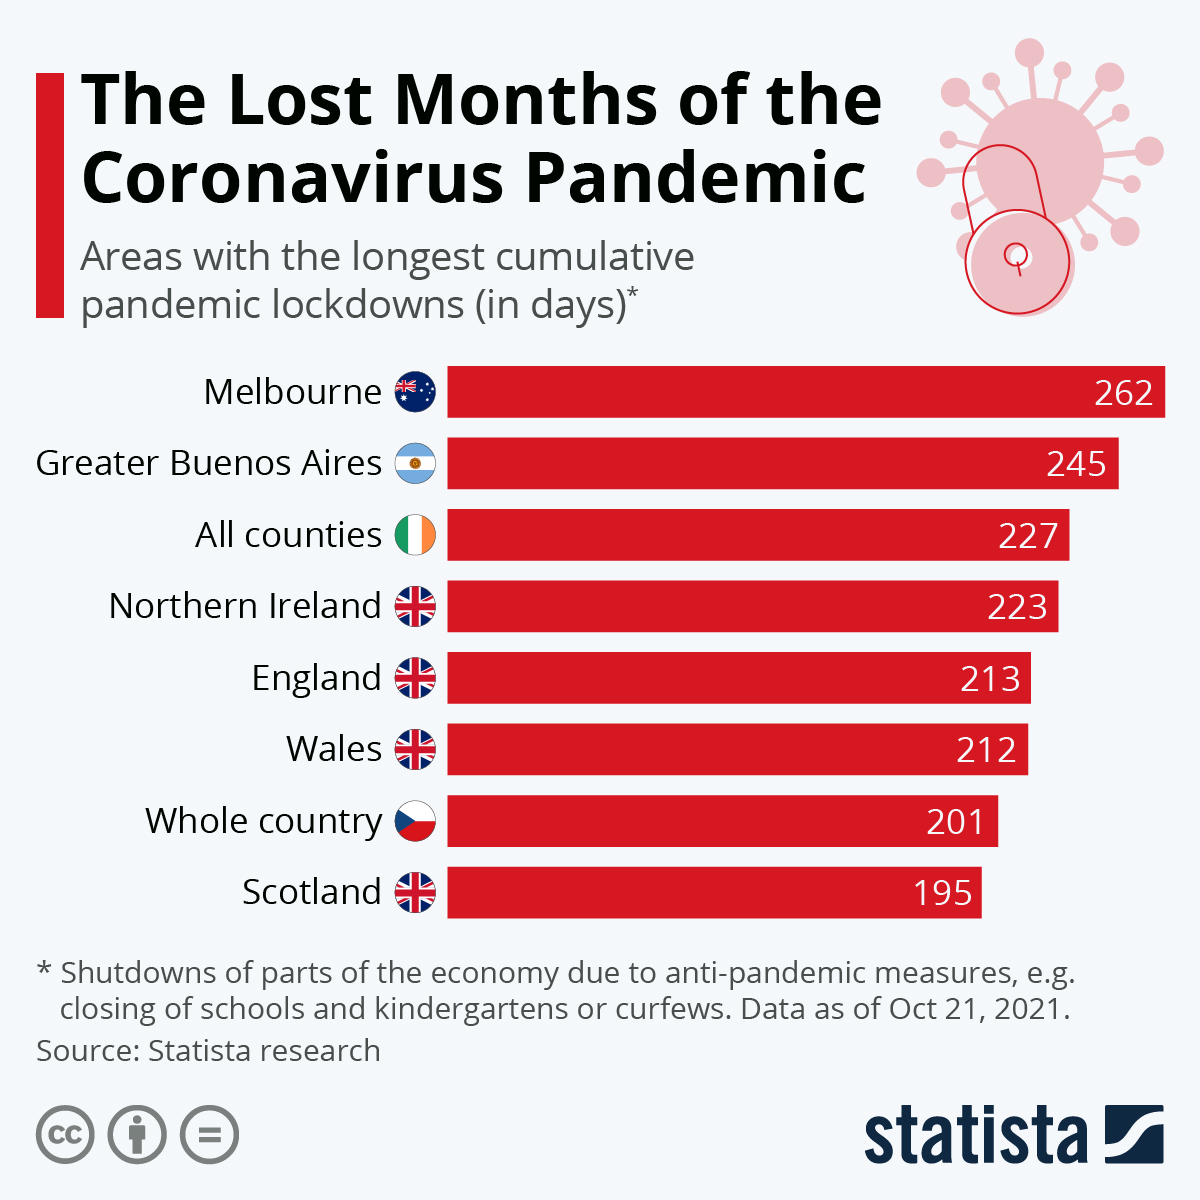 The Lost Months of the Coronavirus Pandemic